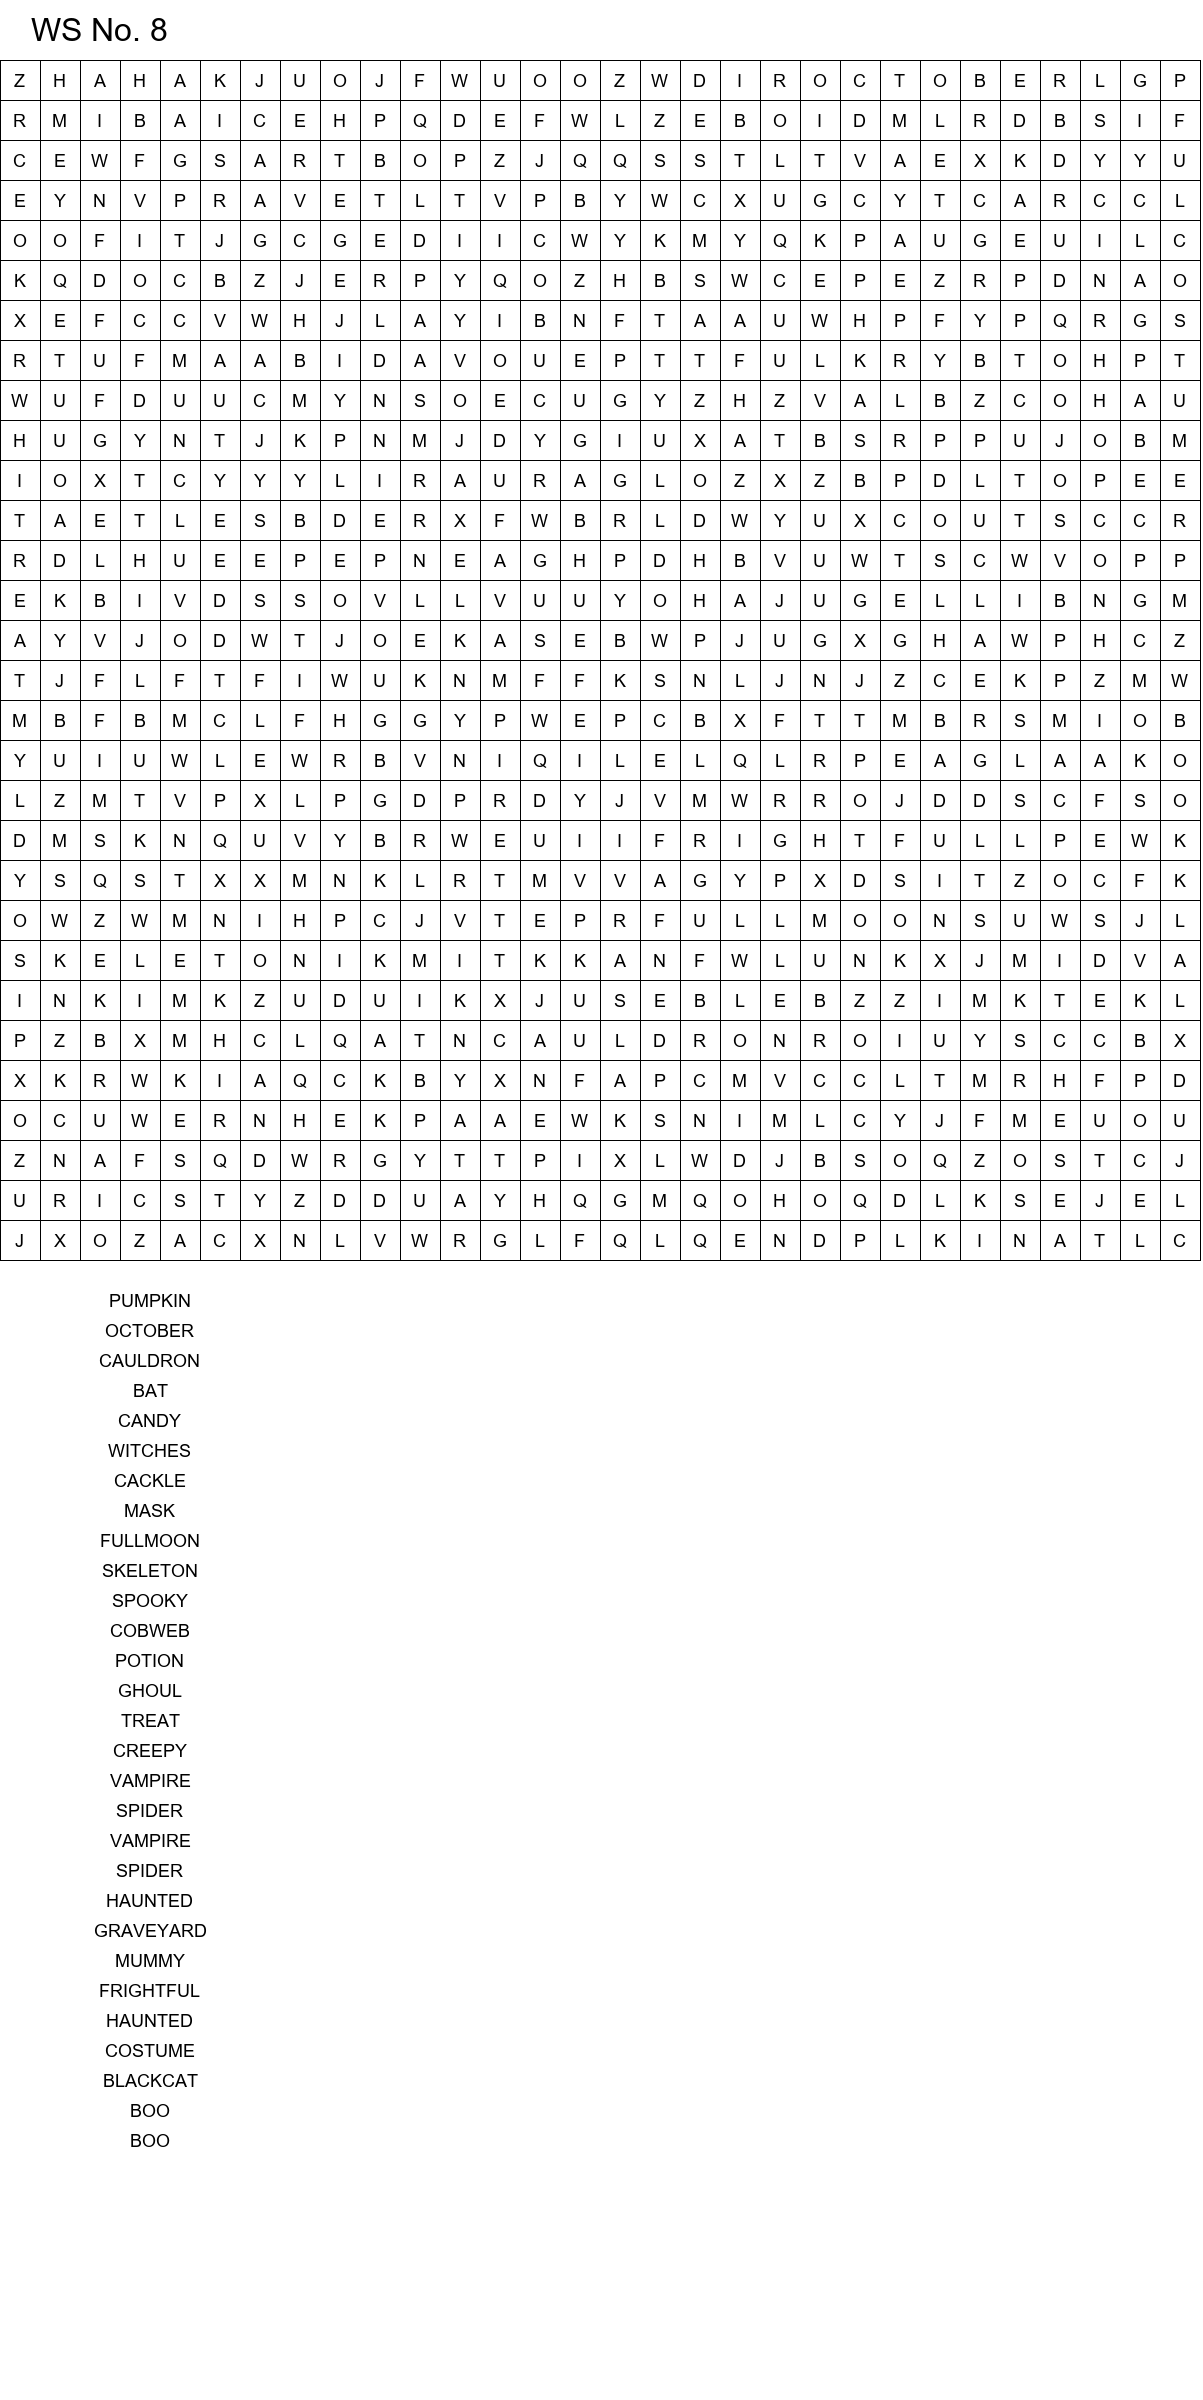 Challenging Halloween word search for adults size 30x30 No 8